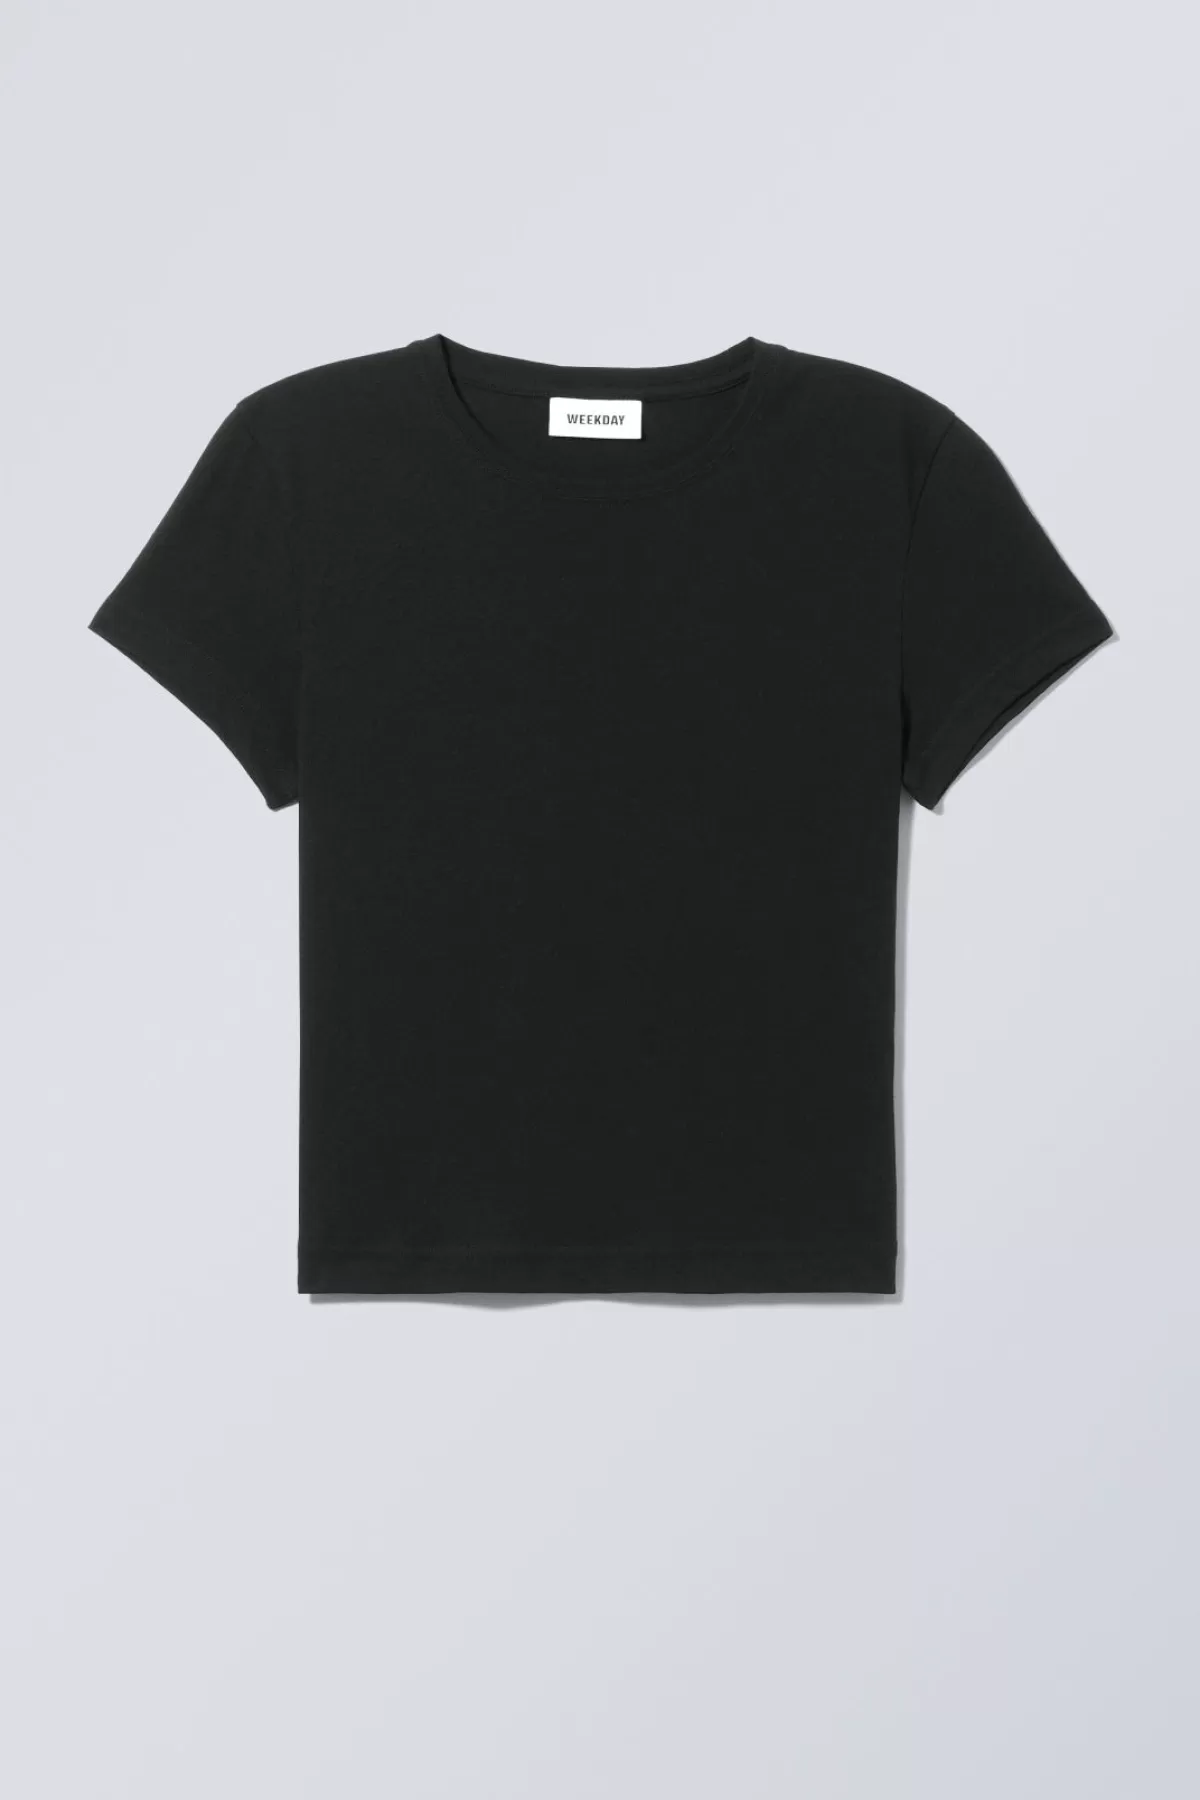 Weekday Tight Fitted T- shirt Best Sale